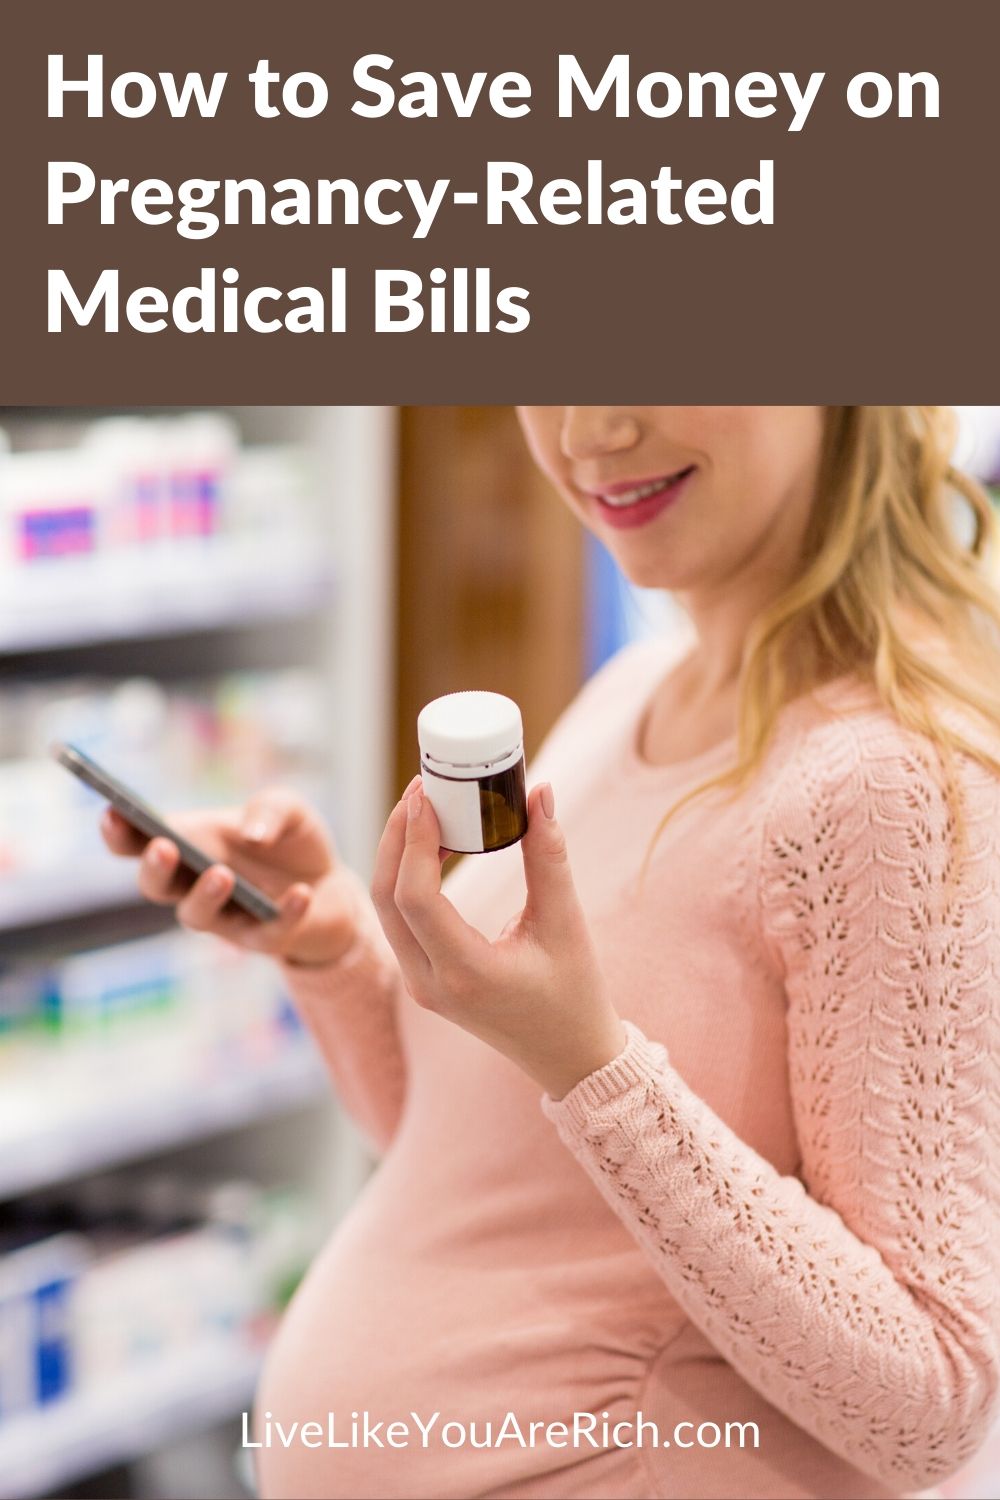 There are some awesome ways to save money on medical bills during pregnancy, labor, and postpartum. Some I found after searching for hours online and talking to insurance representatives for my first pregnancy. And a few I didn’t find until my second pregnancy and really wished I had known about them for my first!